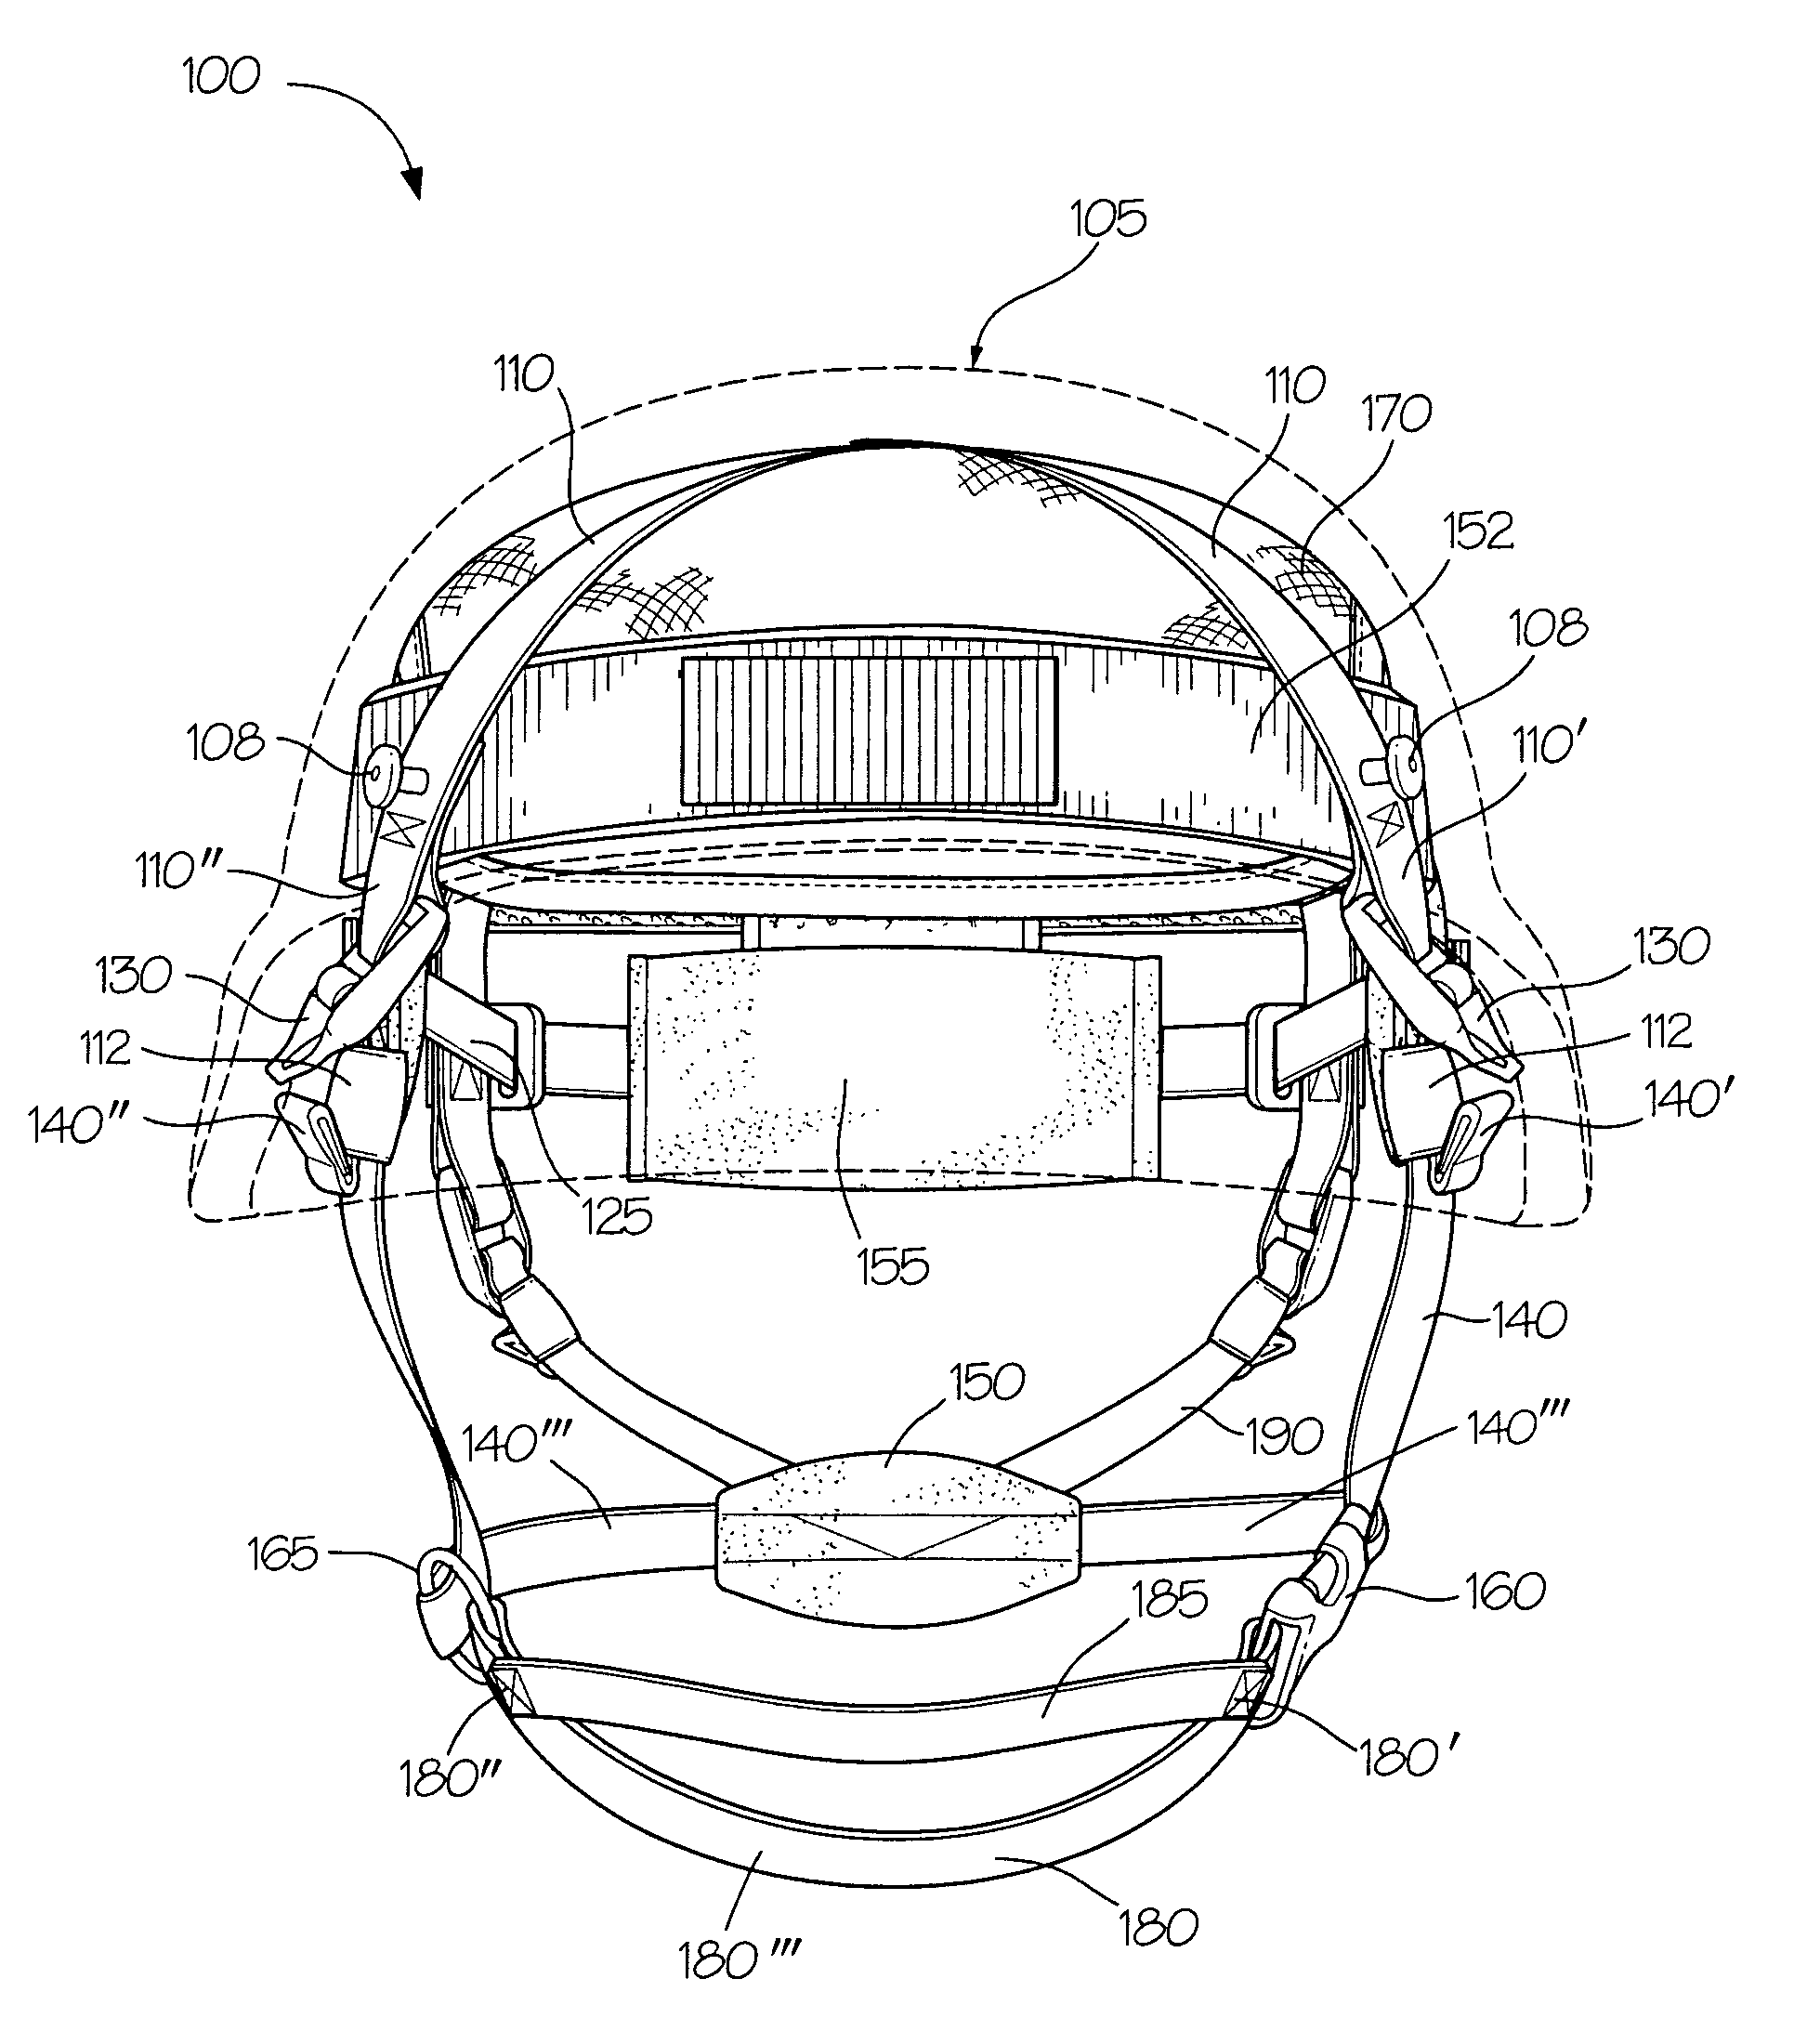 Suspension system and chin strap assembly for a helmet